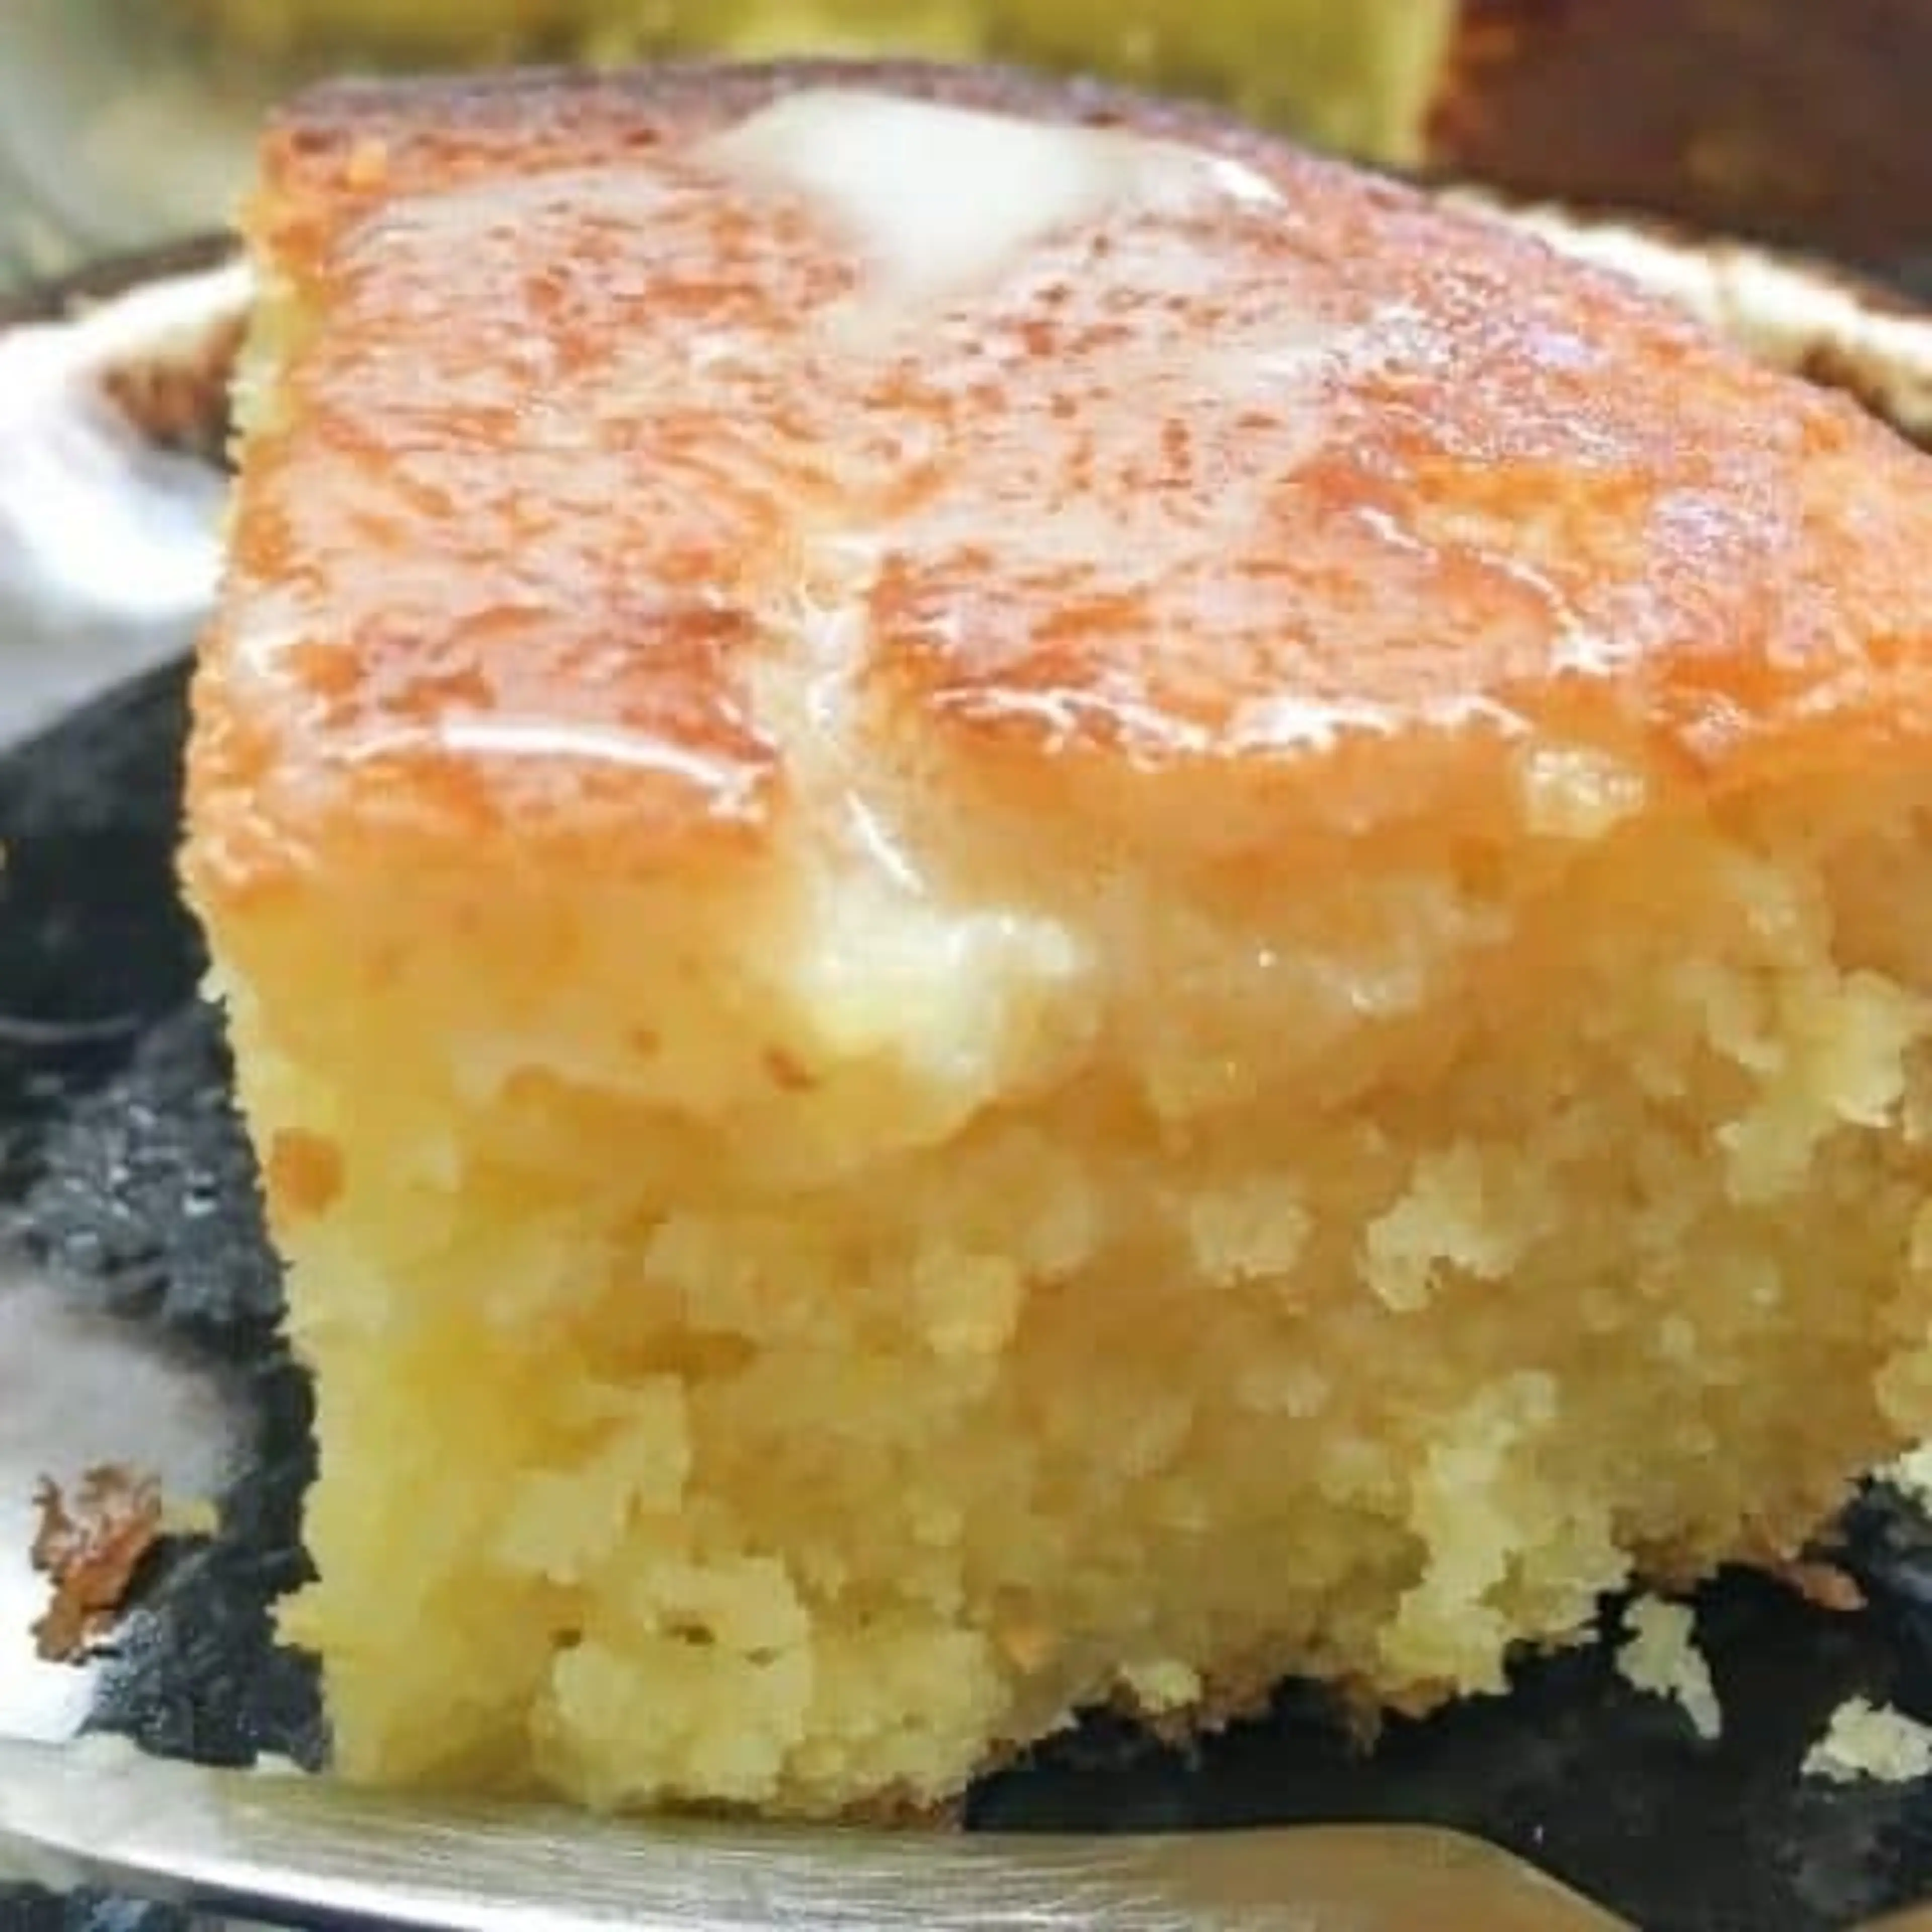 What Can I Do To Make Jiffy Cornbread More Moist?